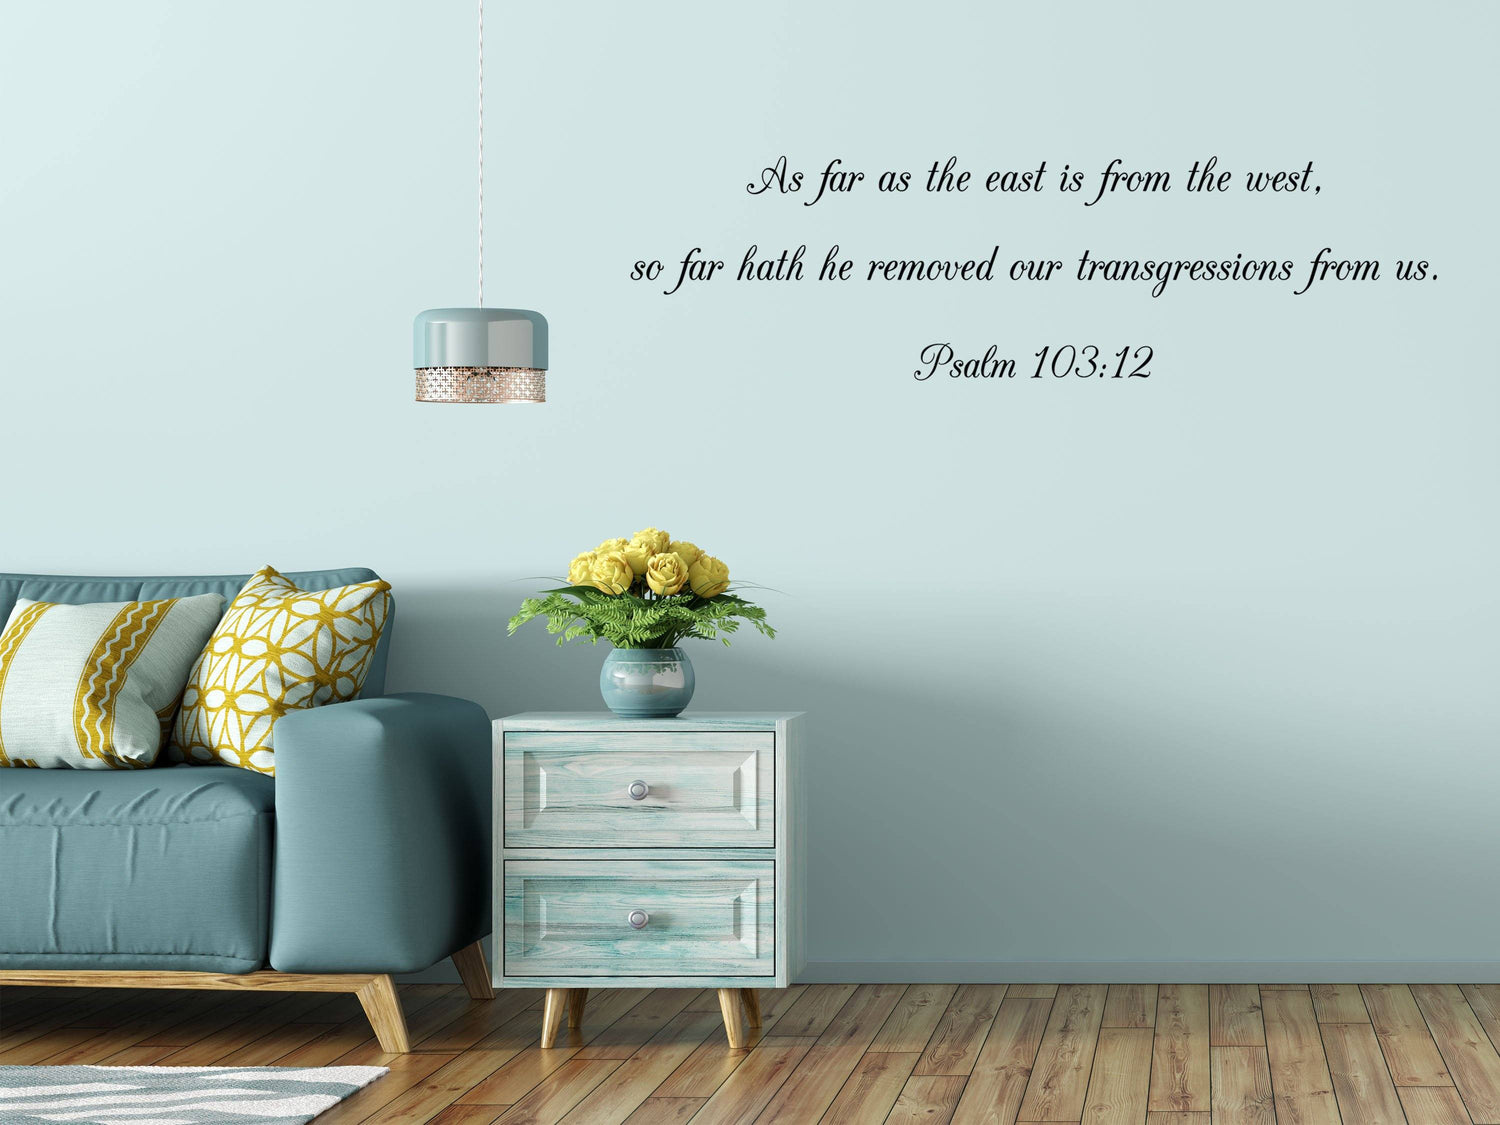 Psalm 103:12 KJV Bible Verse Wall Decal - As Far As The East Is From The West - Christian Quote - Inspirational Bedroom Signs Vinyl Wall Decal Done 